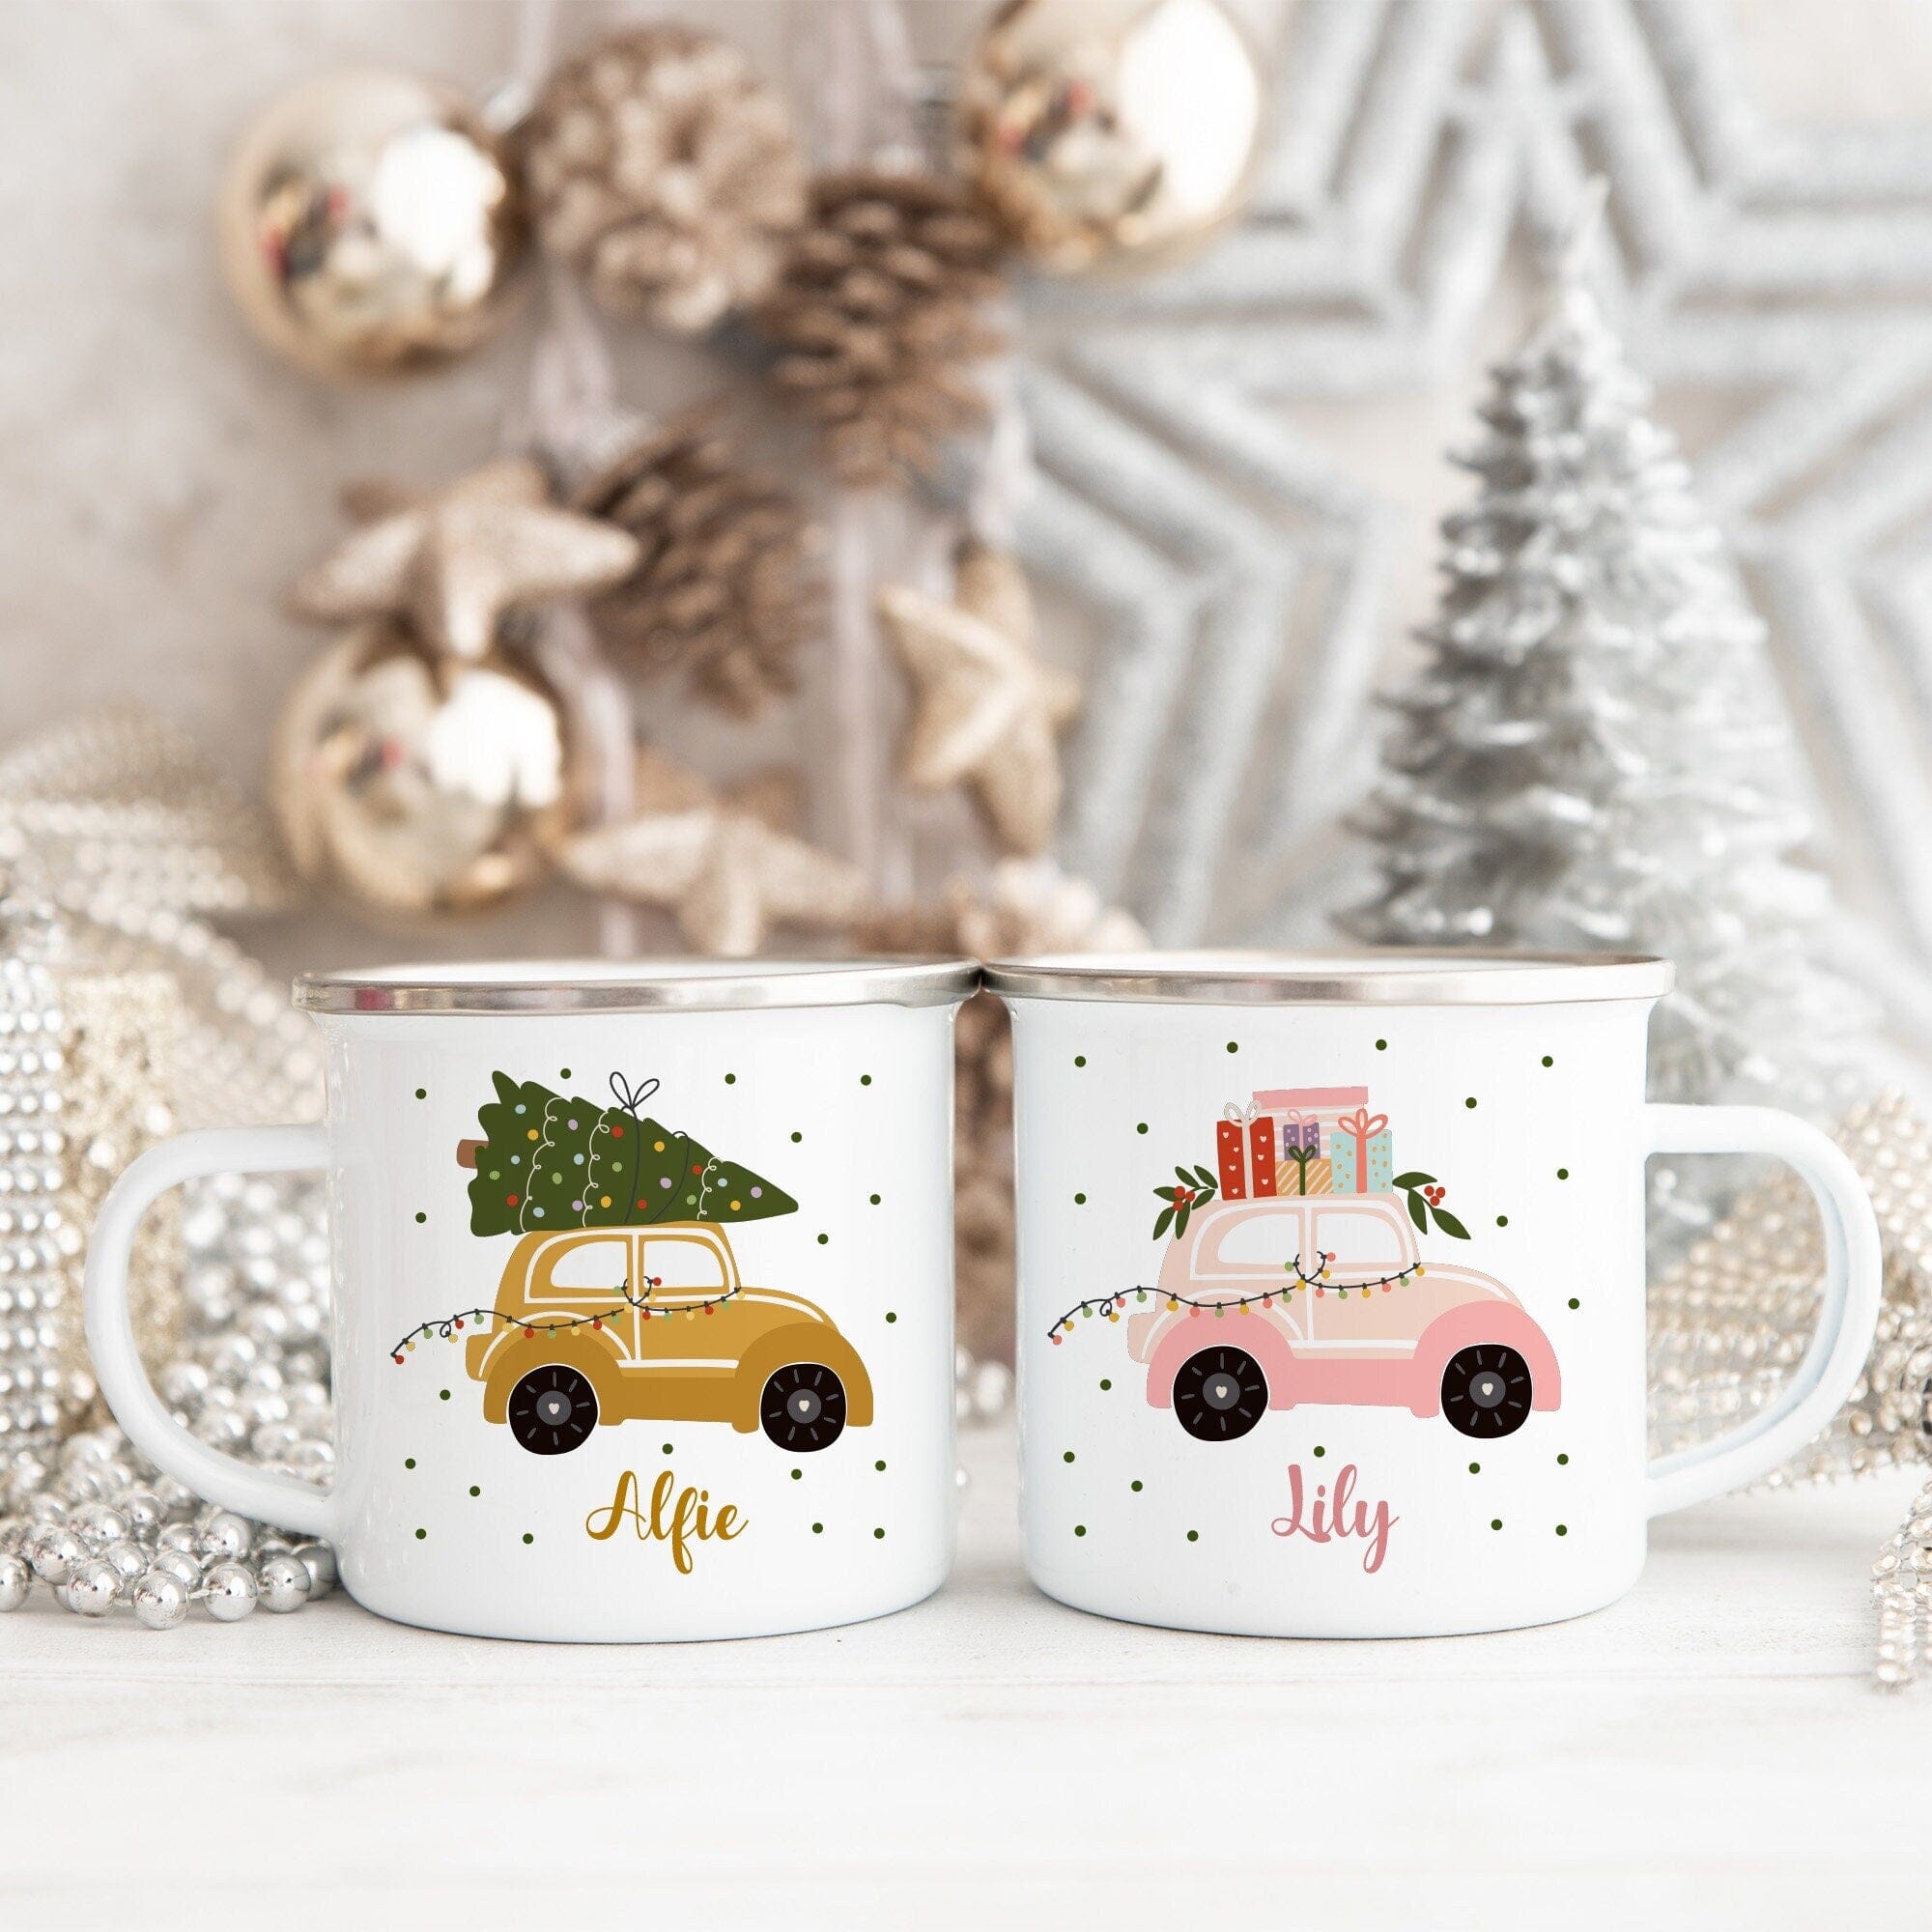 Personalised Christmas Enamel Mug Gift For Him Her Kids Couple Unbreakable Hot Chocolate Cup